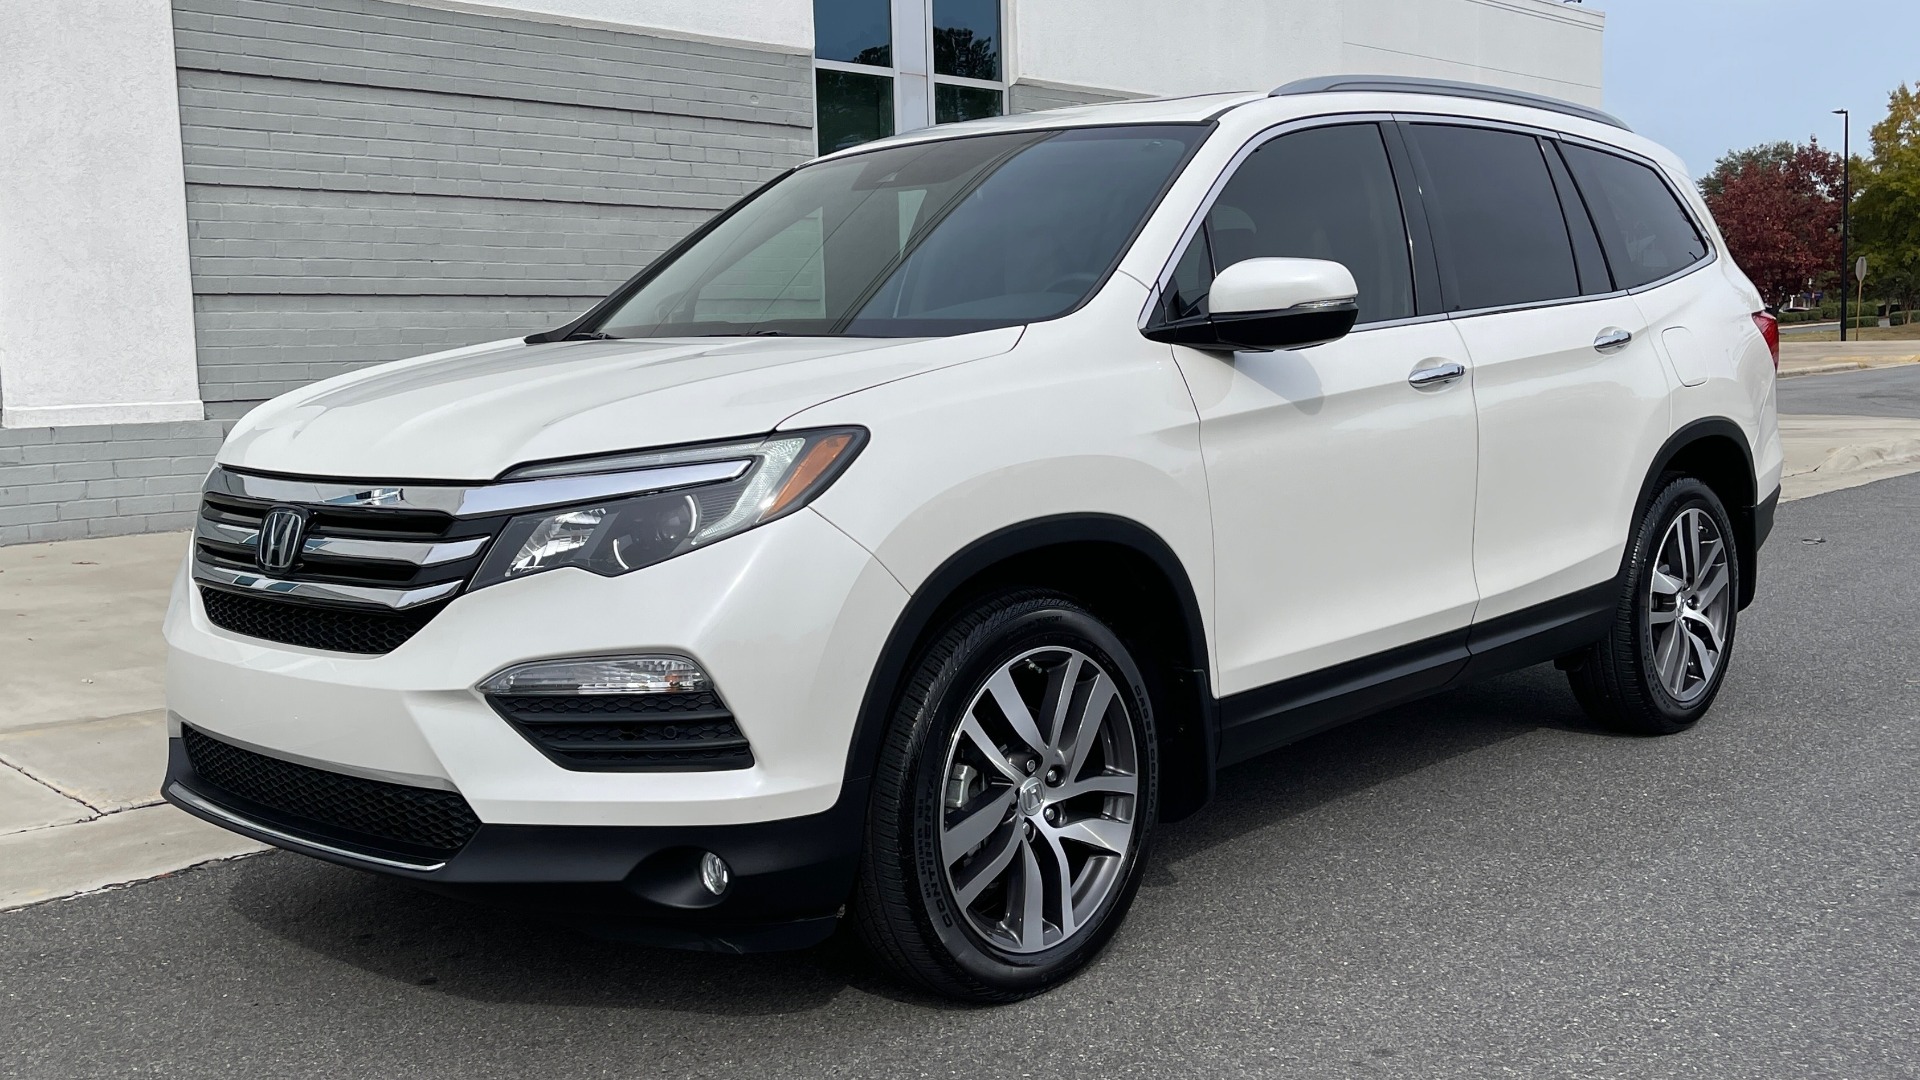 Used 2018 Honda PILOT TOURING AWD / 3.5L V6 / NAV / SUNROOF / 3-ROW / REARVIEW for sale Sold at Formula Imports in Charlotte NC 28227 2